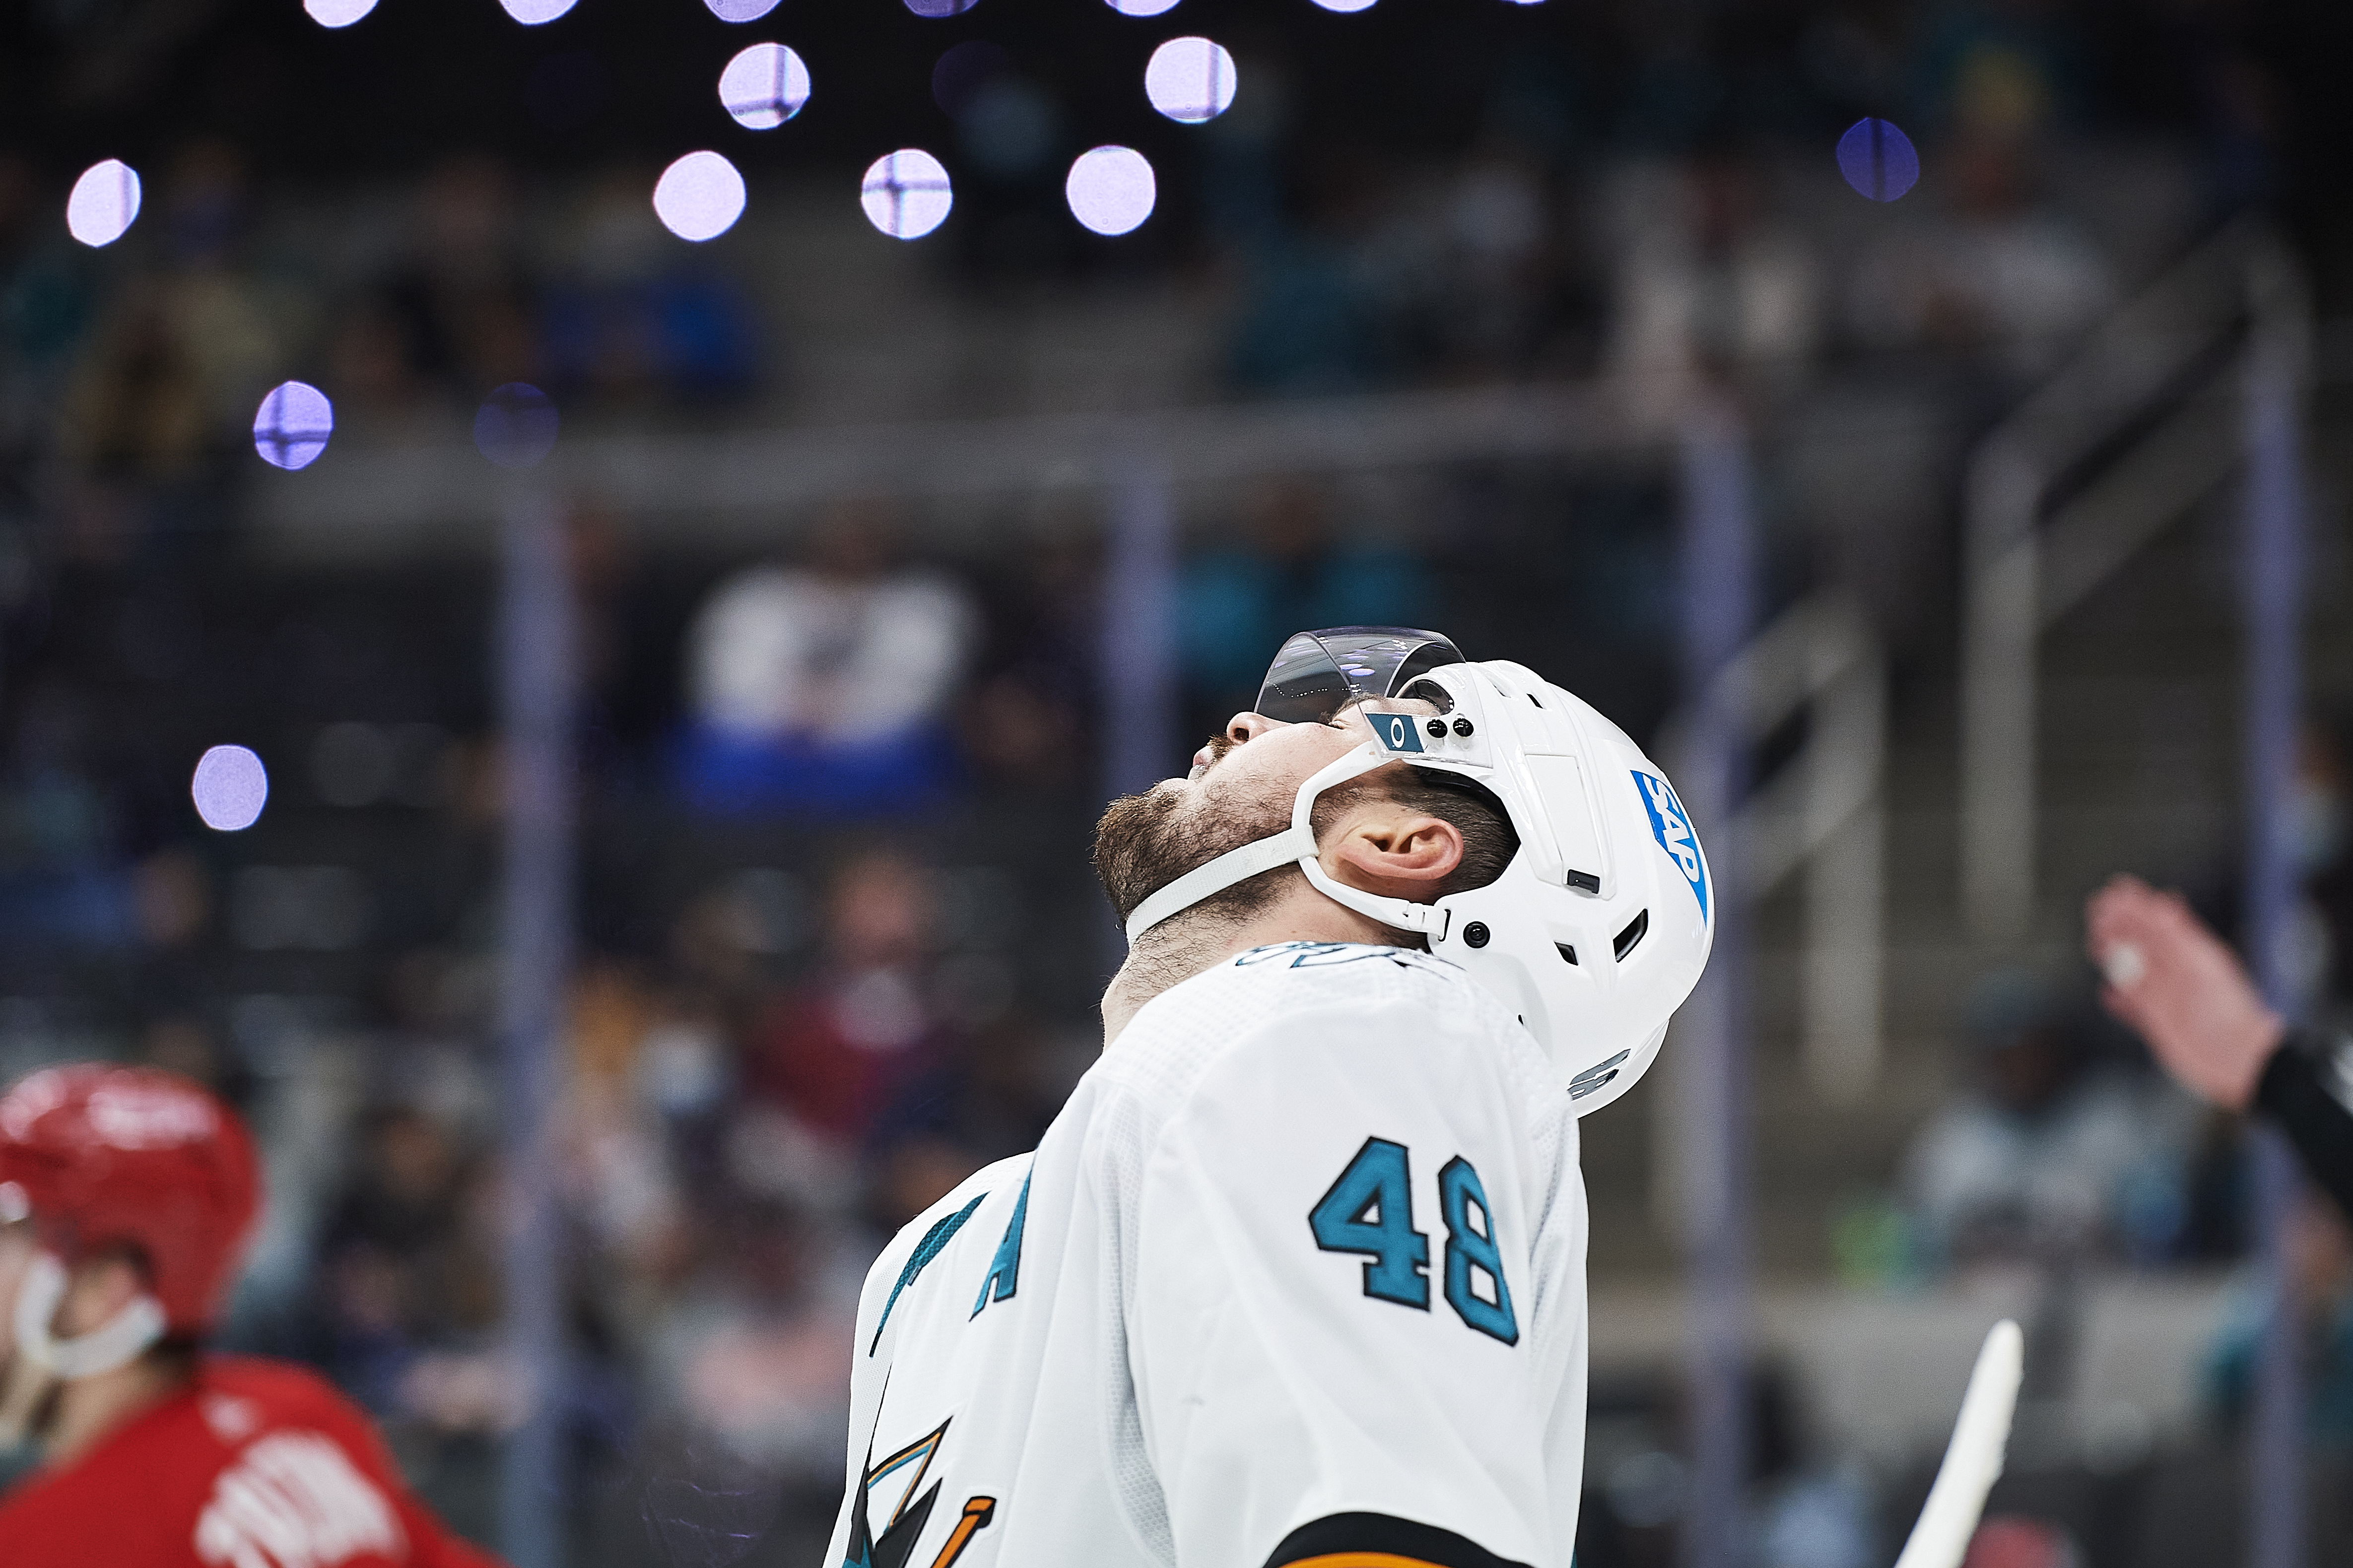 San Jose Sharks center Tomas Hertl (48) reacts after a play during the NHL game between the San Jose Sharks and the Detroit Red Wings on January 11, 2022 at SAP Center in San Jose, CA.